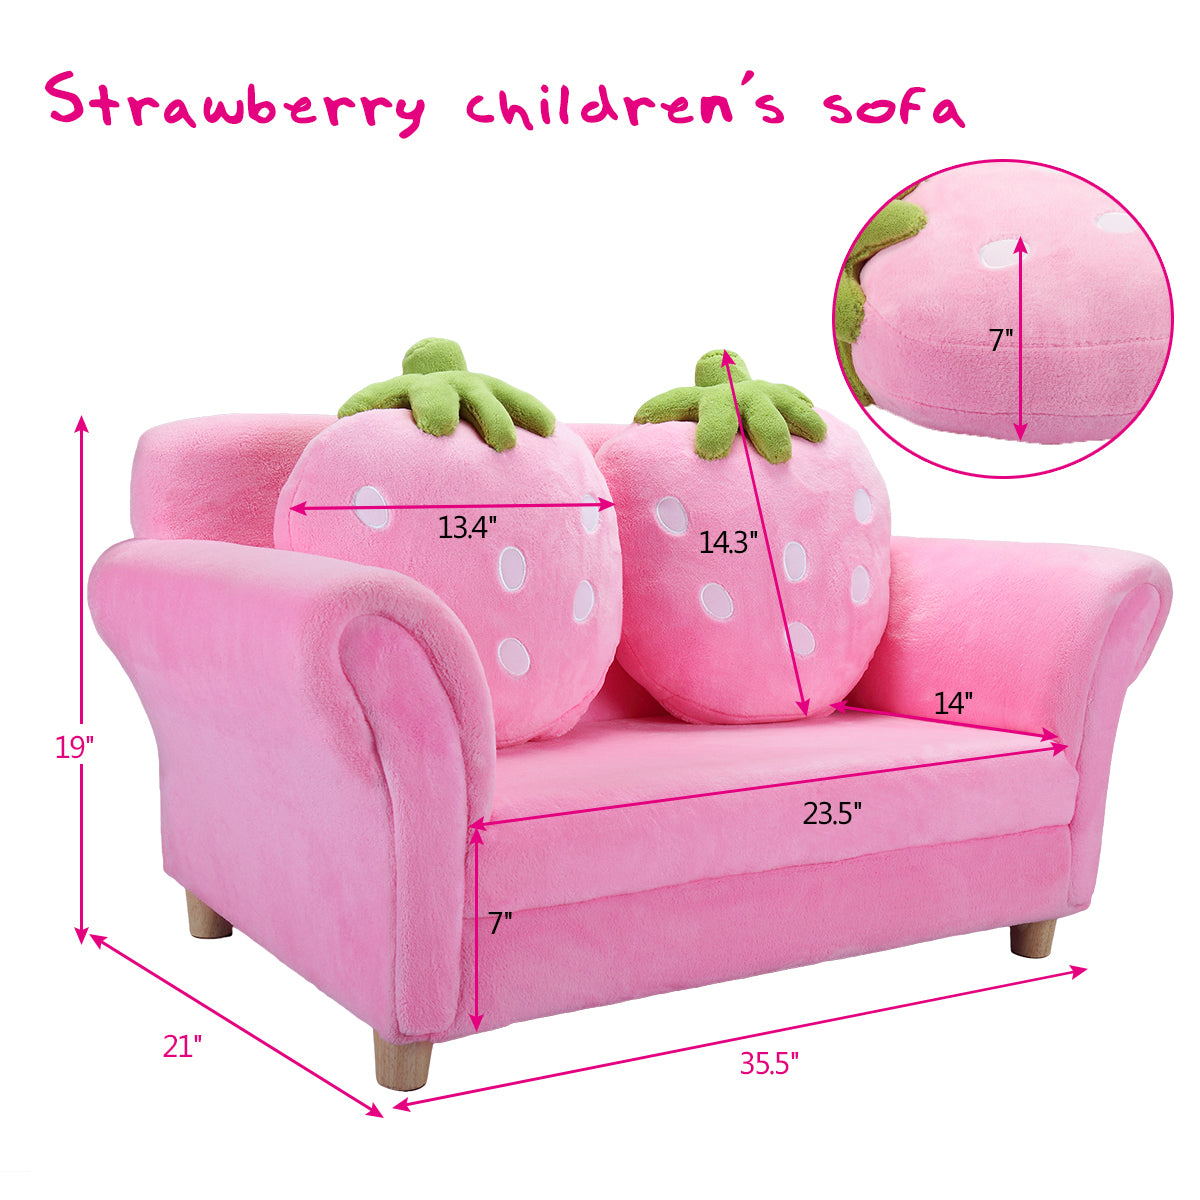 Children’s Double Pink Sofa Chair w/ 2 Strawberry Pillows and Soft Surfaces